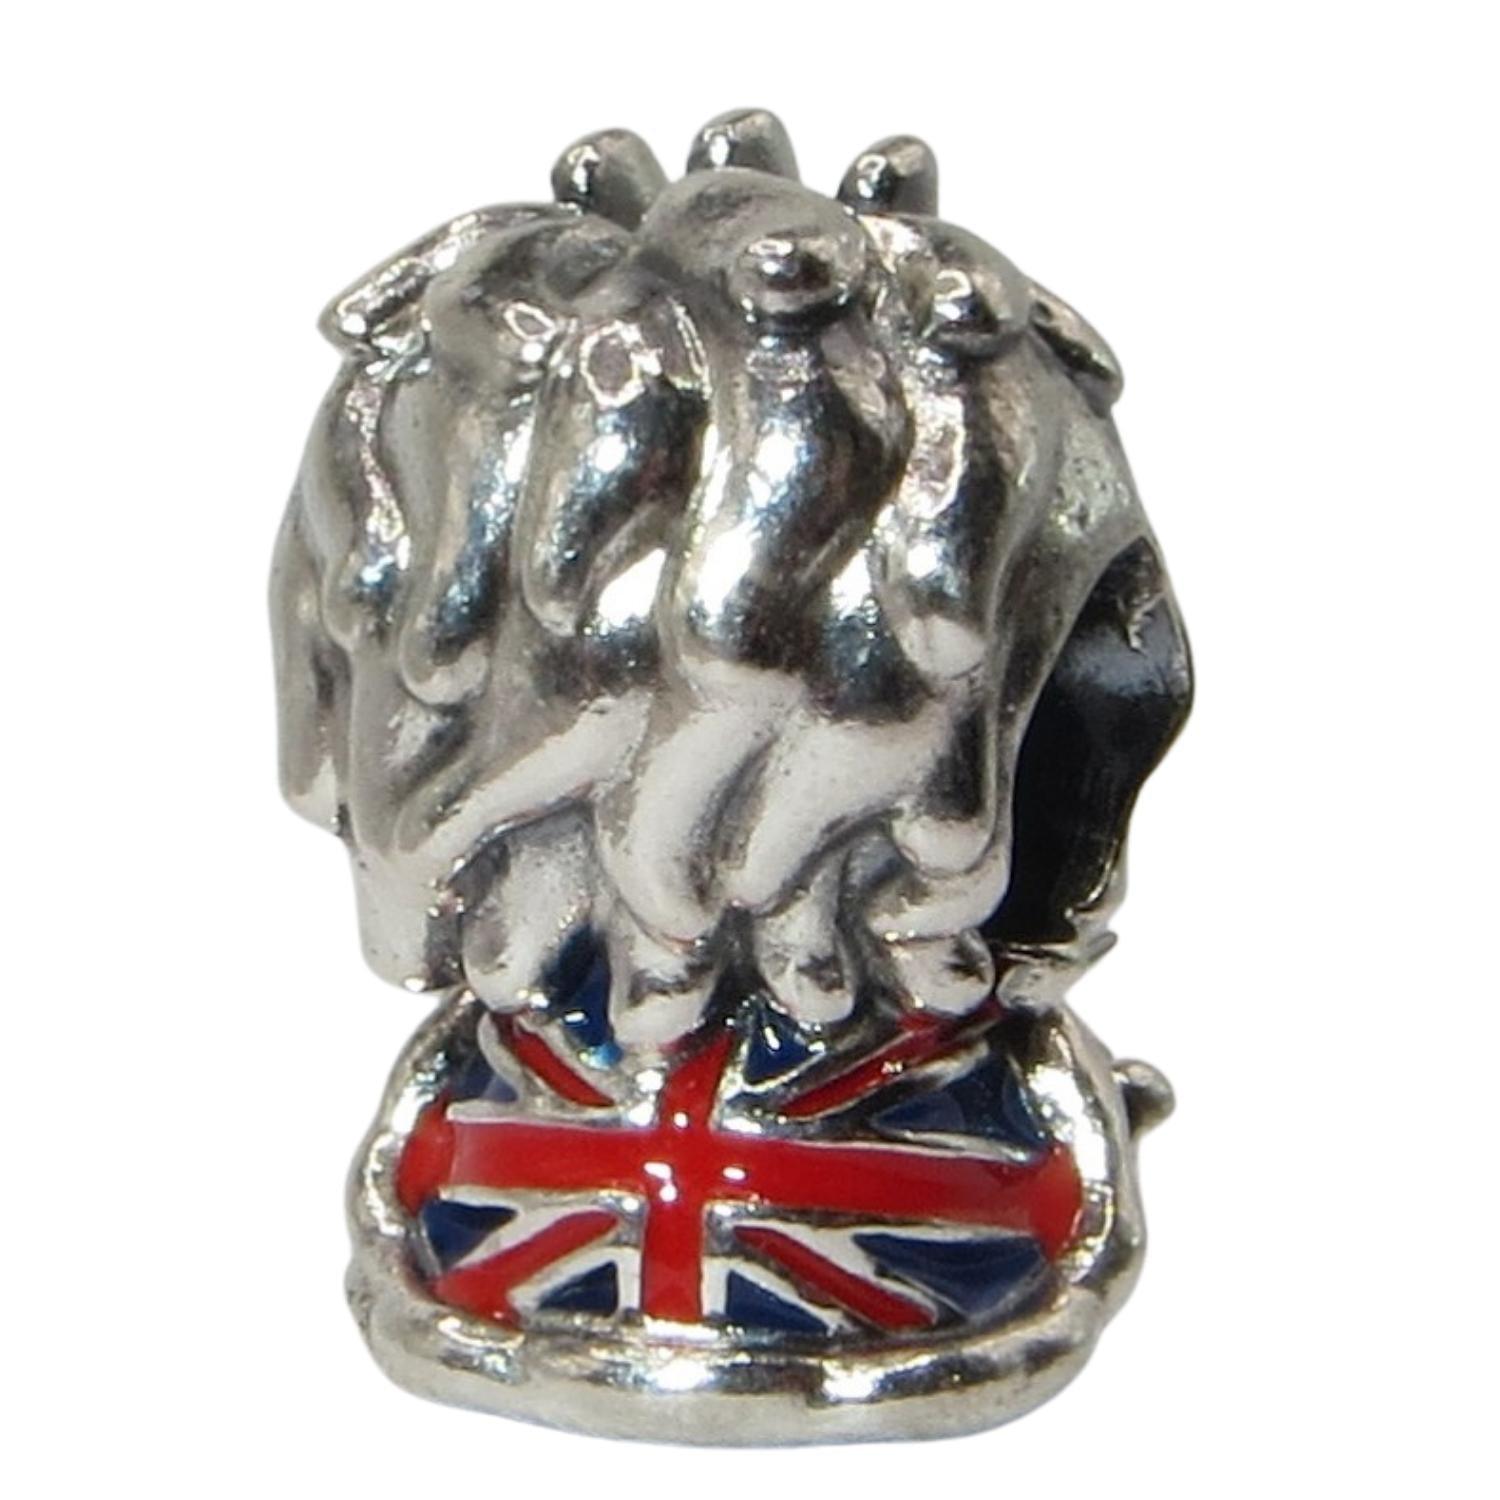 PANDORA 799032C01 Wavy Union Jack Lion - Handsome Sitting Sterling Silver Lion Wearing Cape Emblazoned with Red and Black Enamel Union Jack - Wavy Mane - Women's Charm